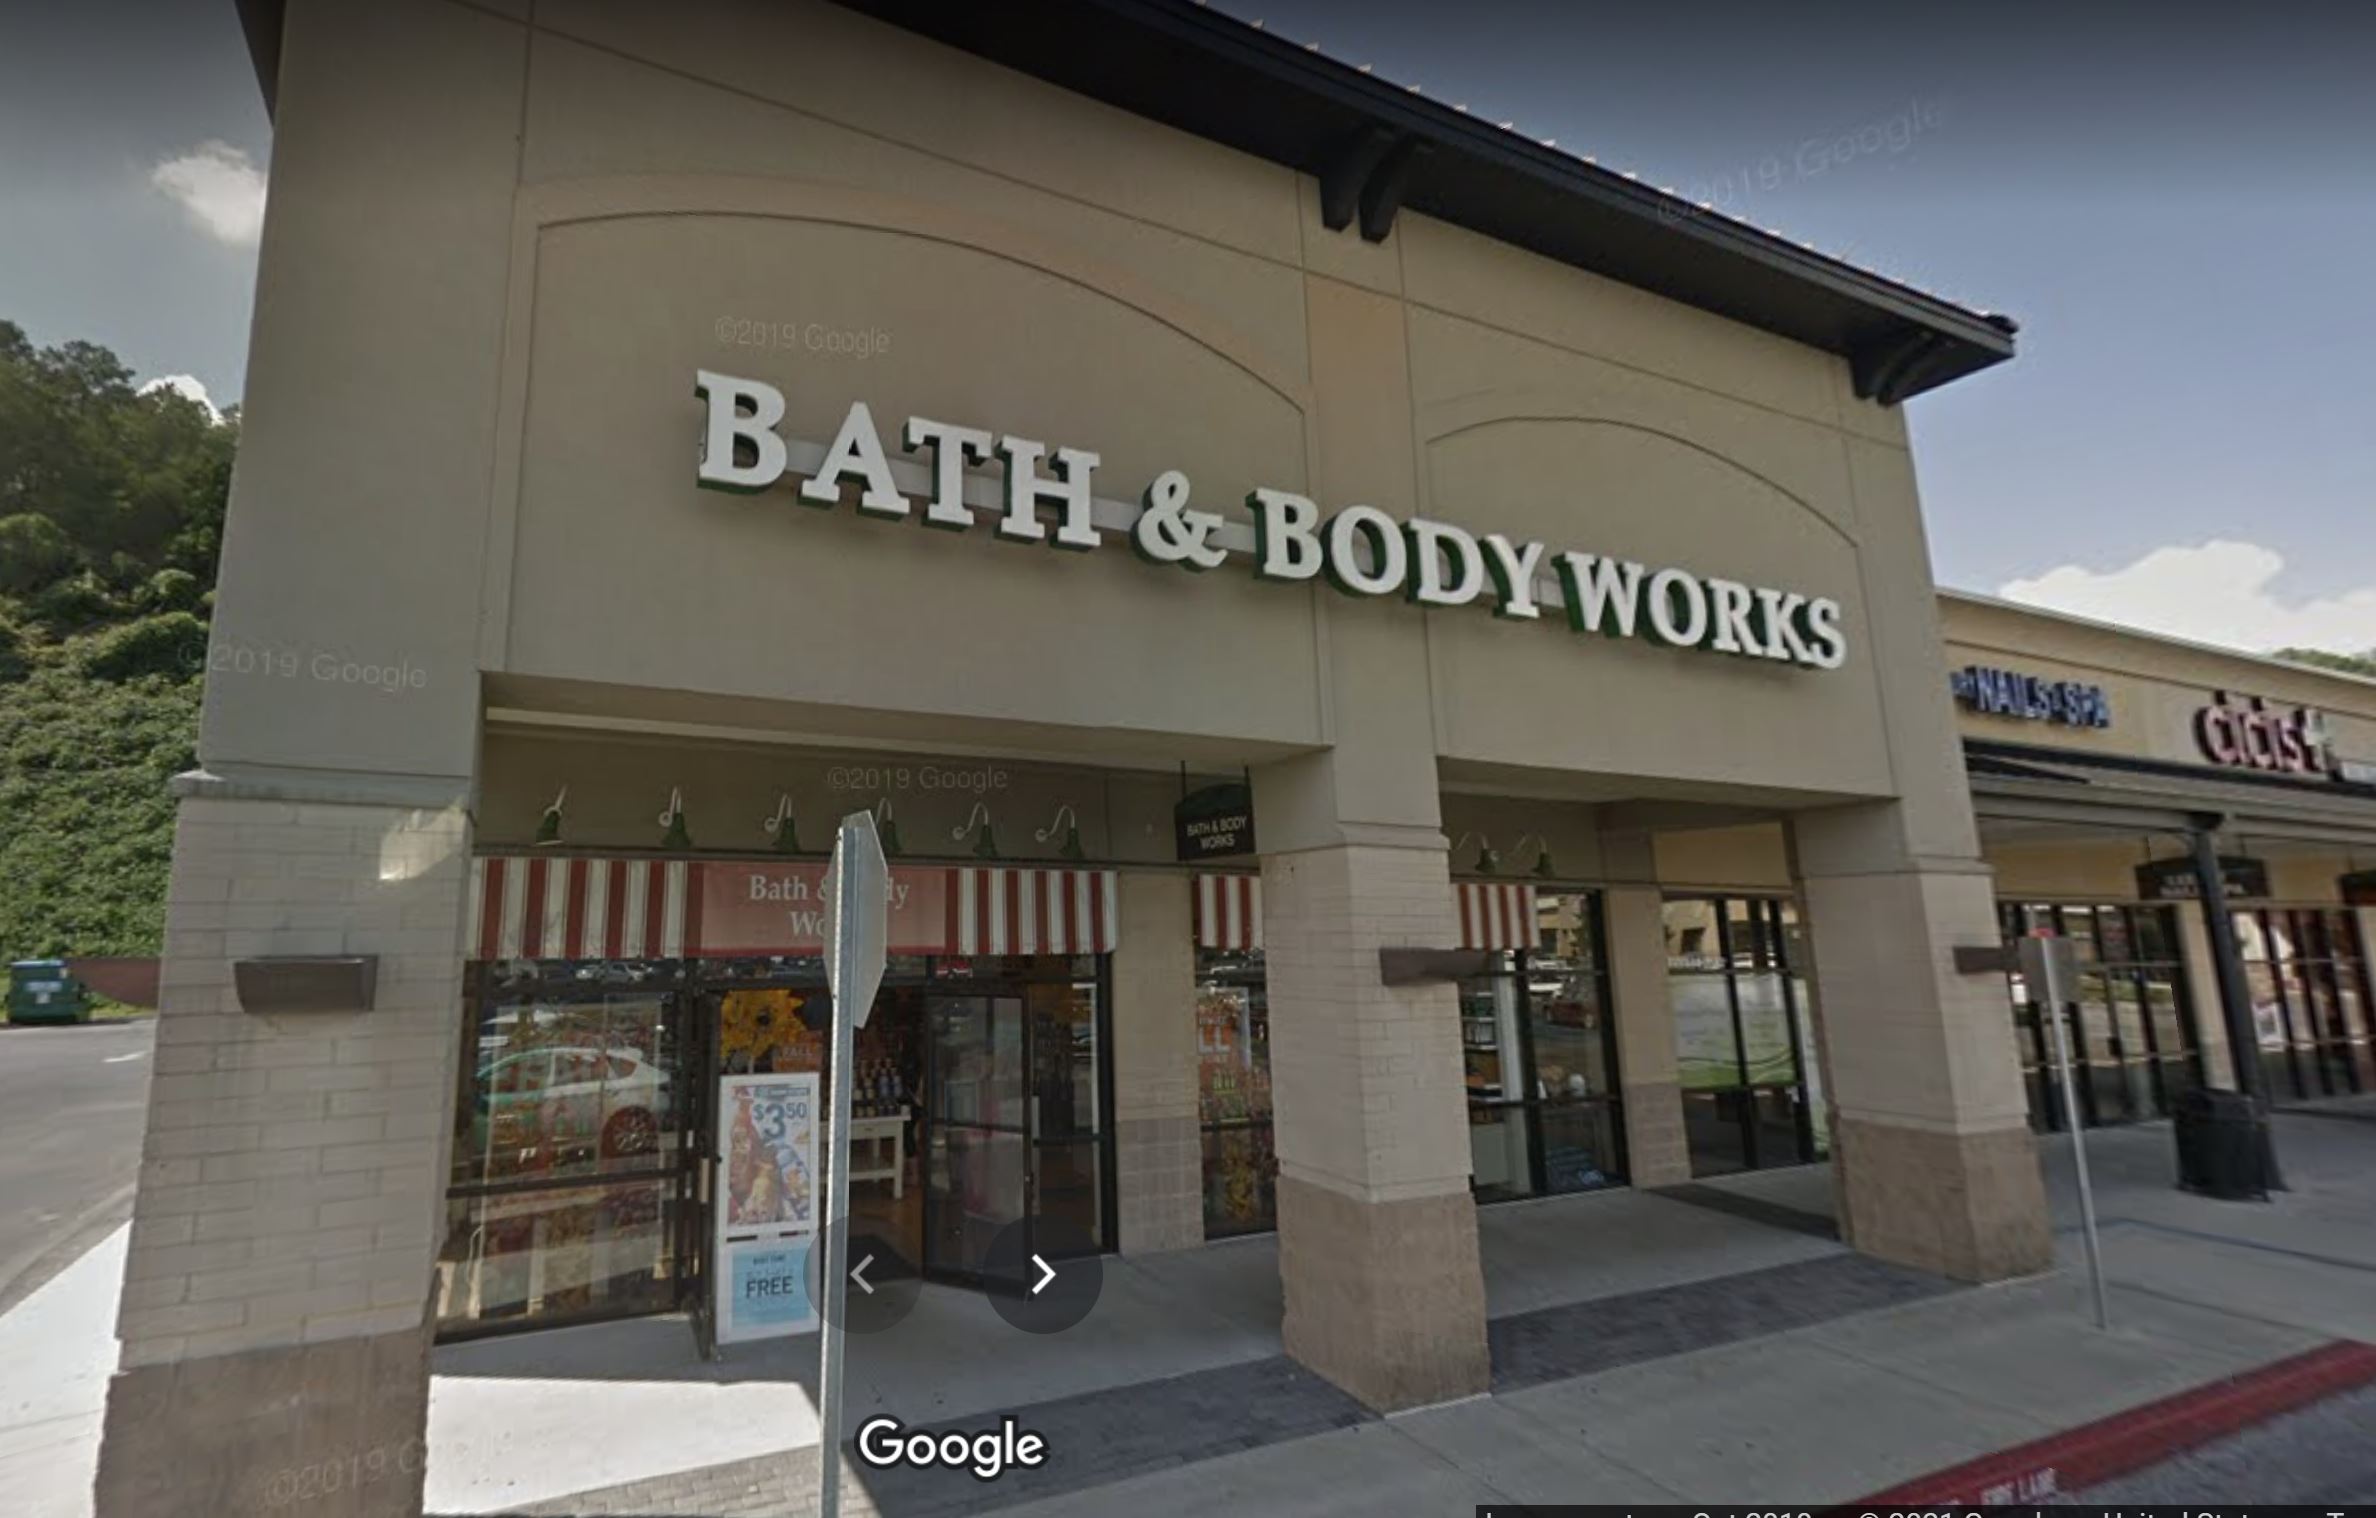 Trussville Fire responds to small fire inside Bath & Body Works